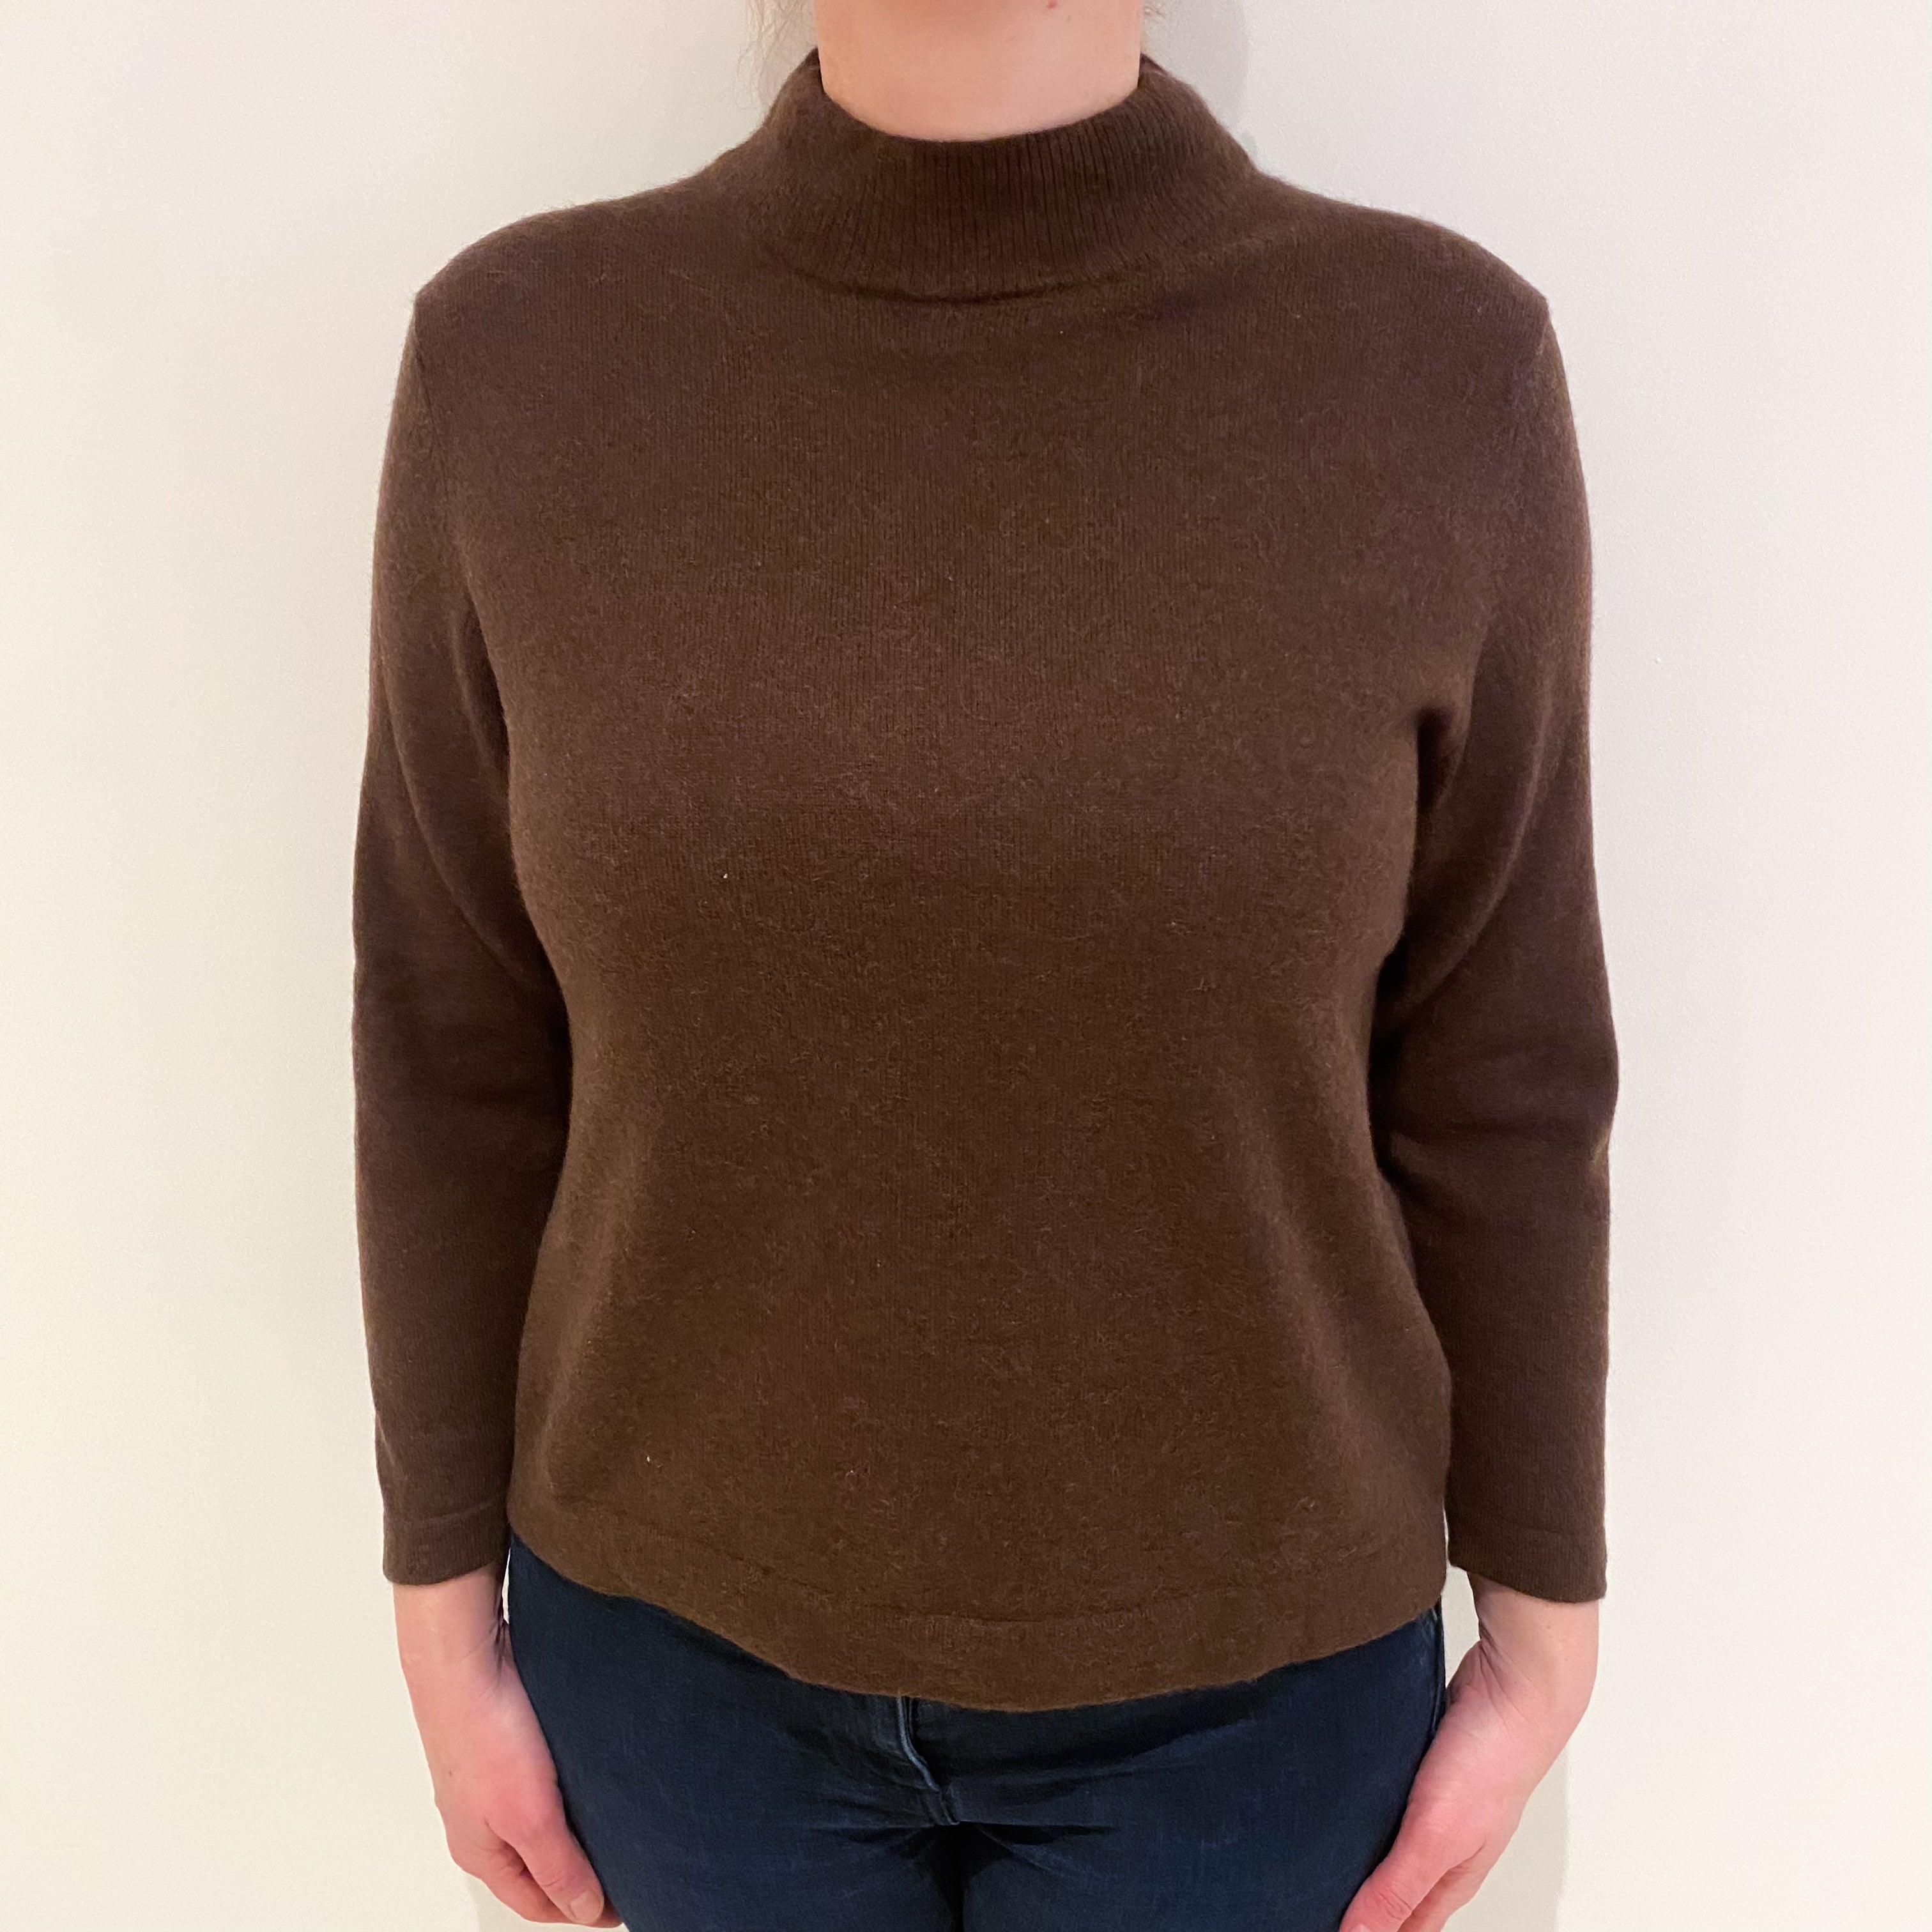 Chocolate Brown Cashmere Turtle Neck Jumper Large